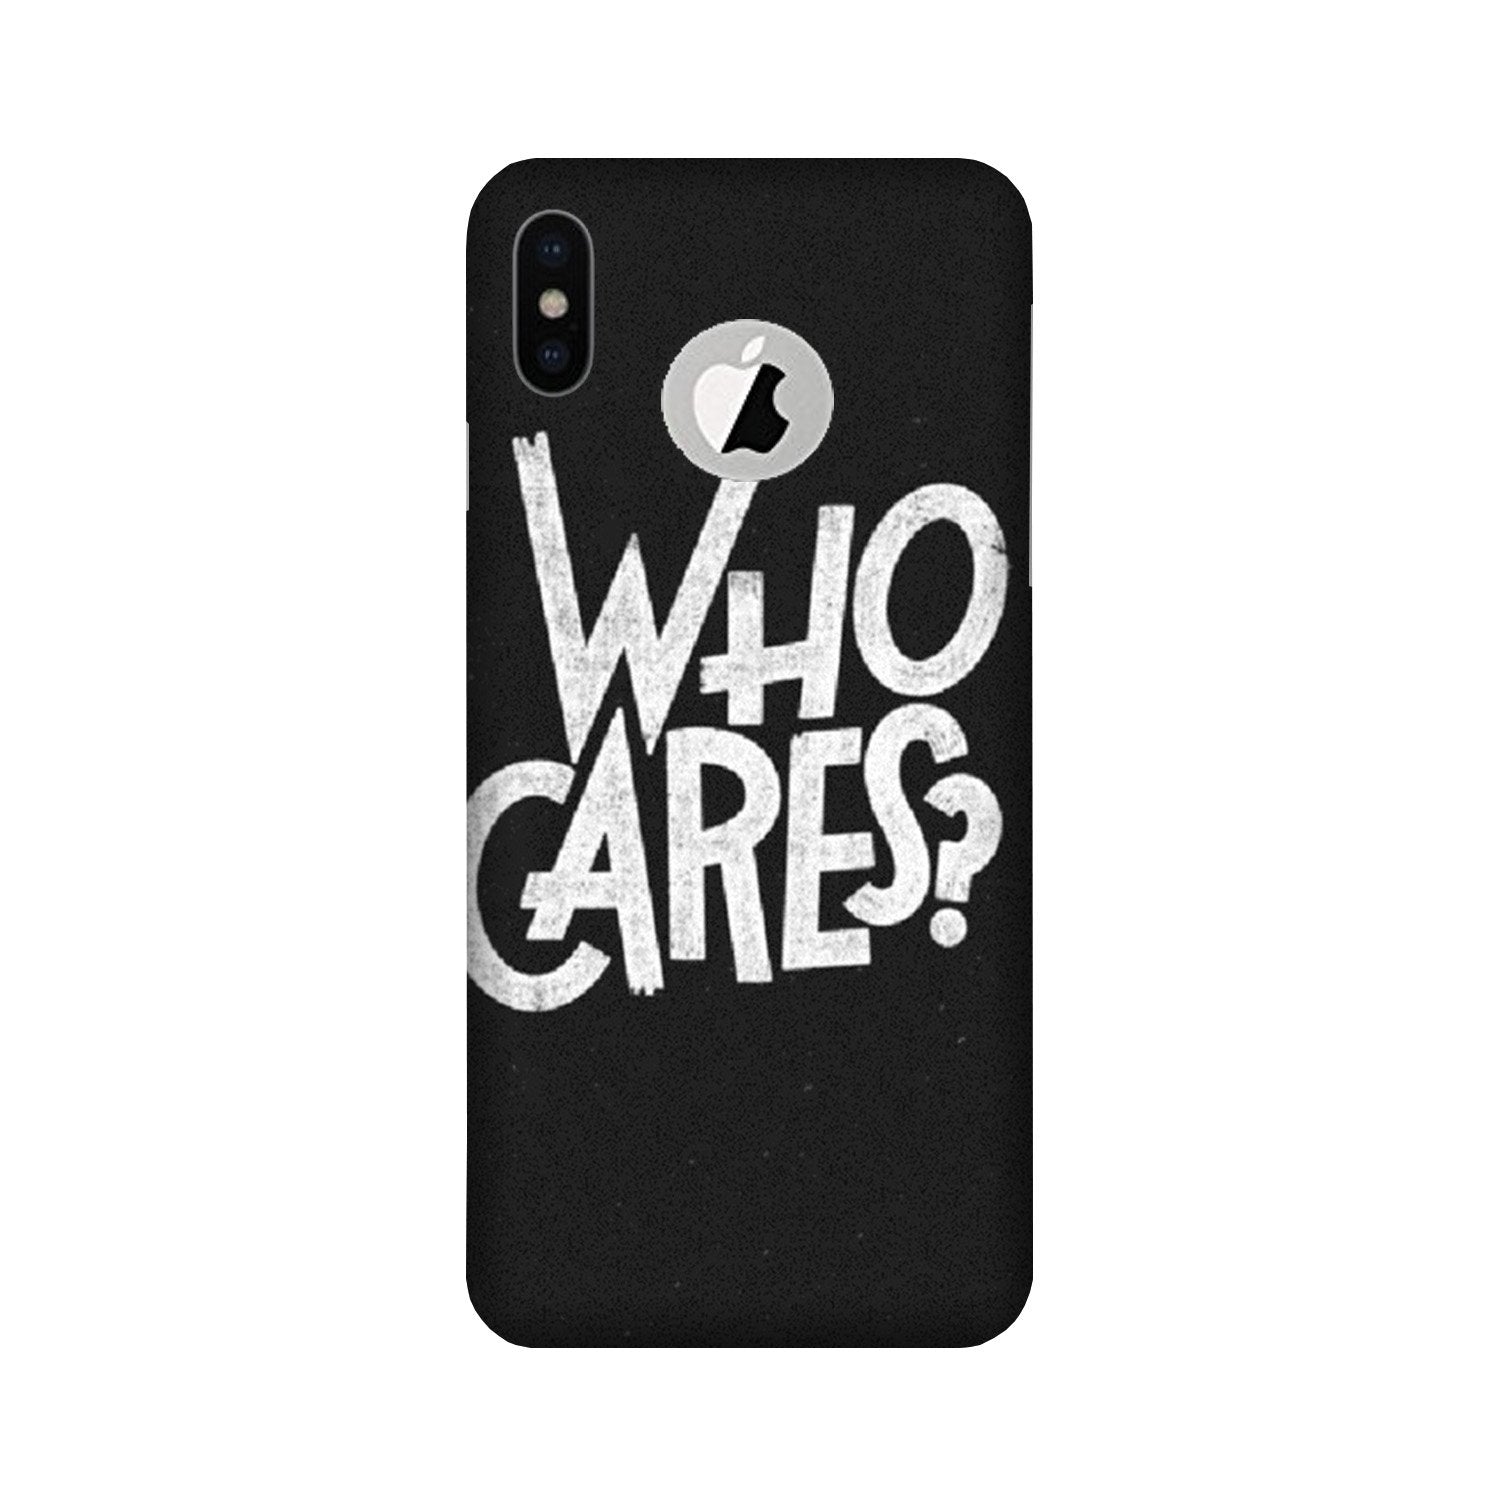 Who Cares Case for iPhone Xs logo cut 